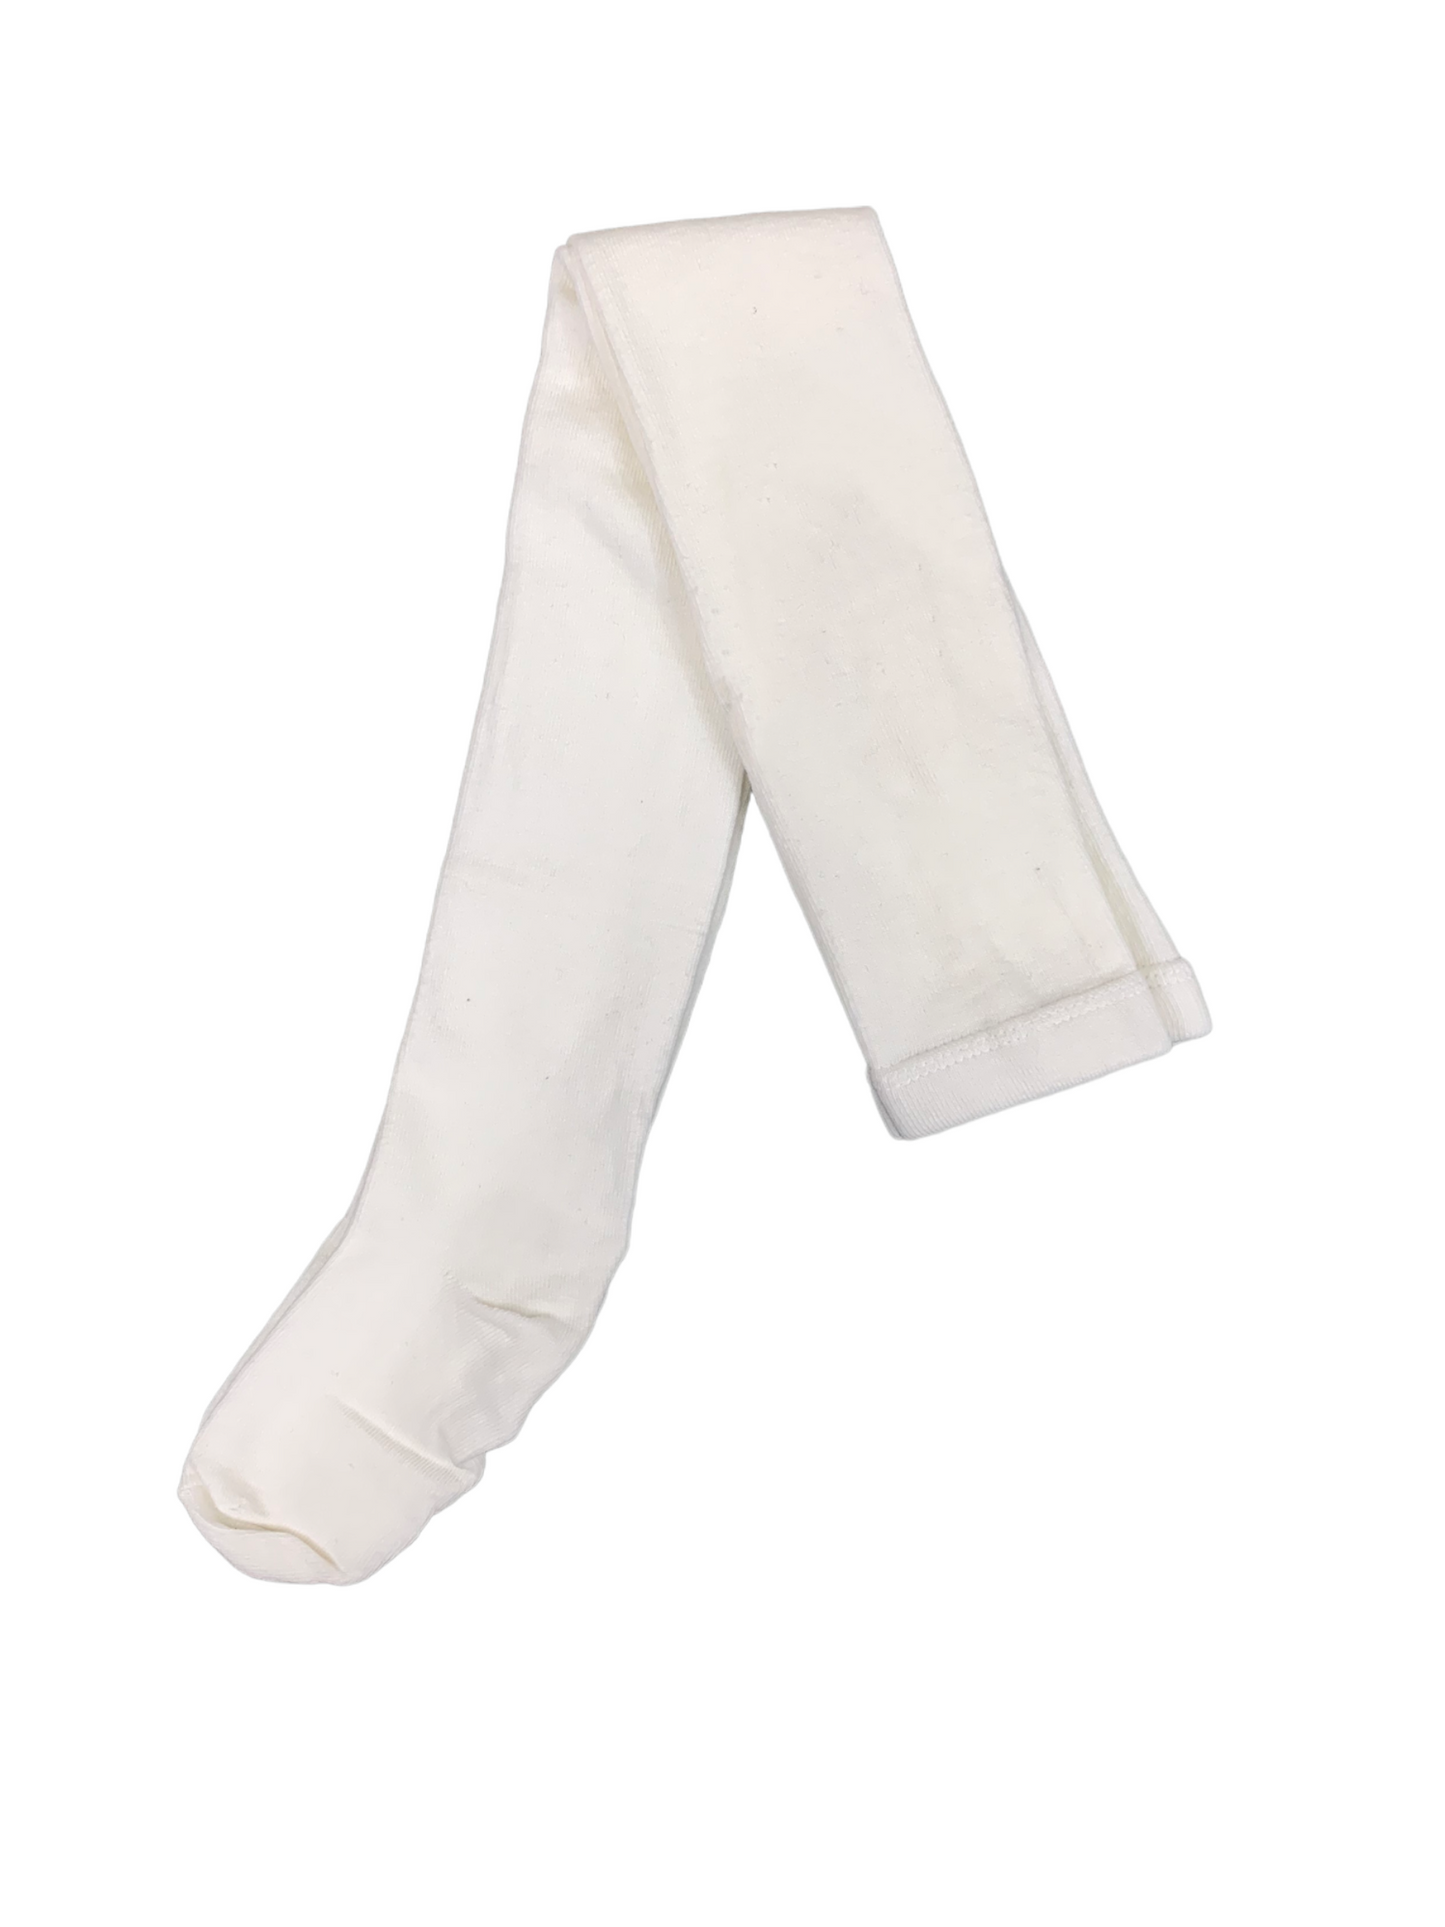 MID white tights for girls 7 to 14 years old